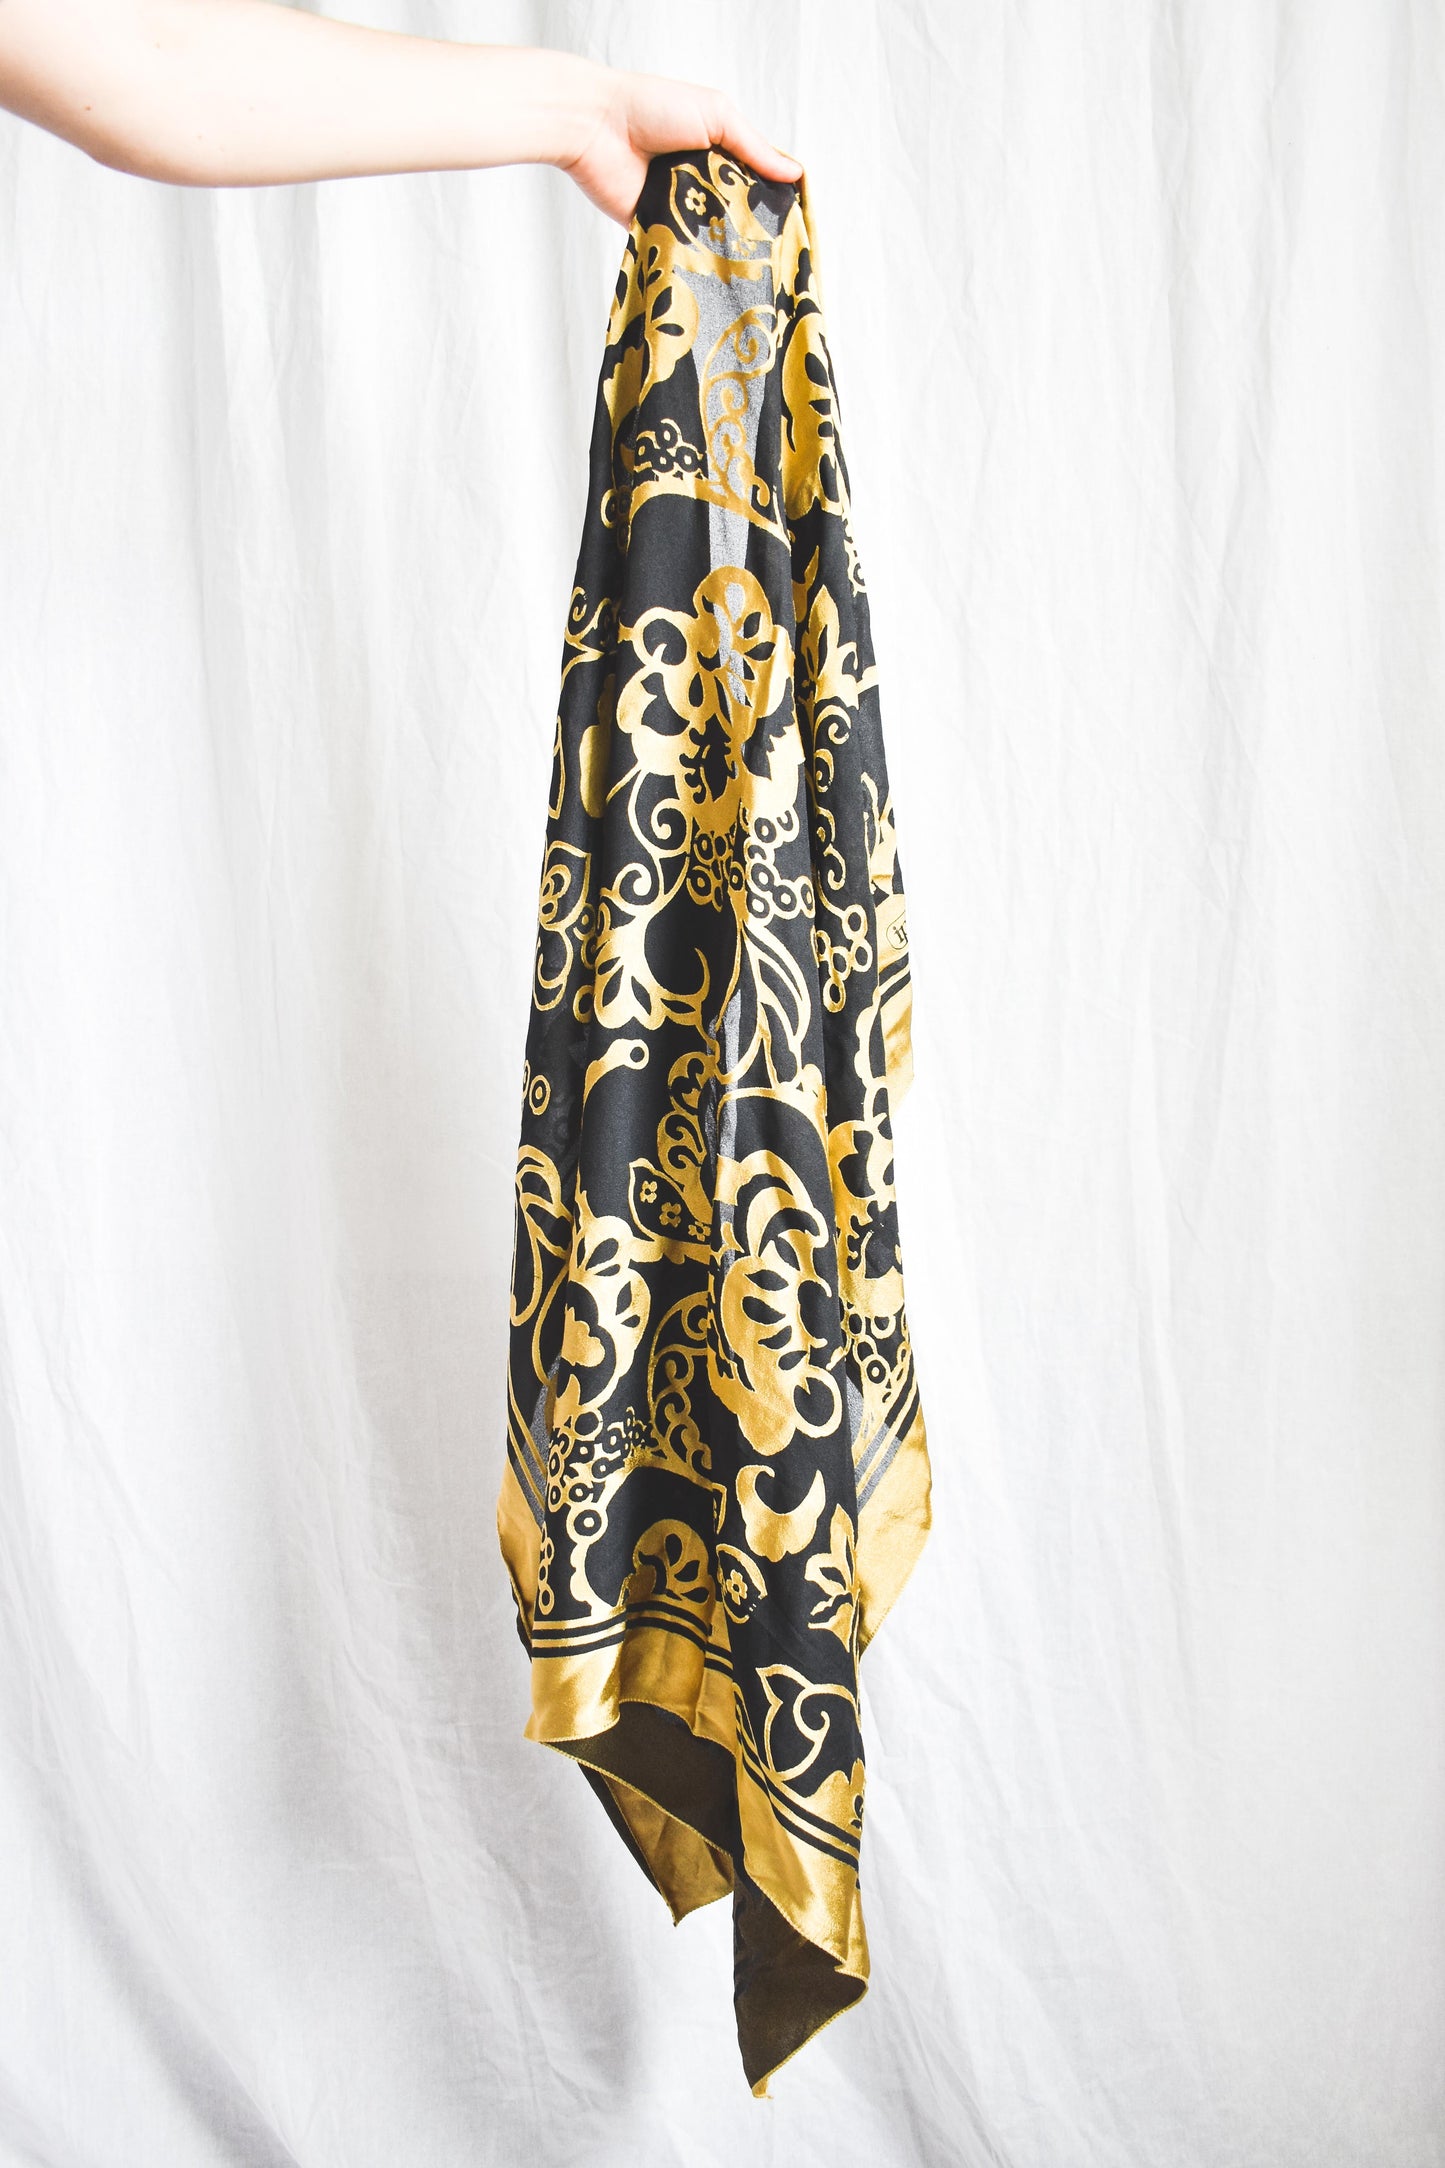 NEW IN! Scarf